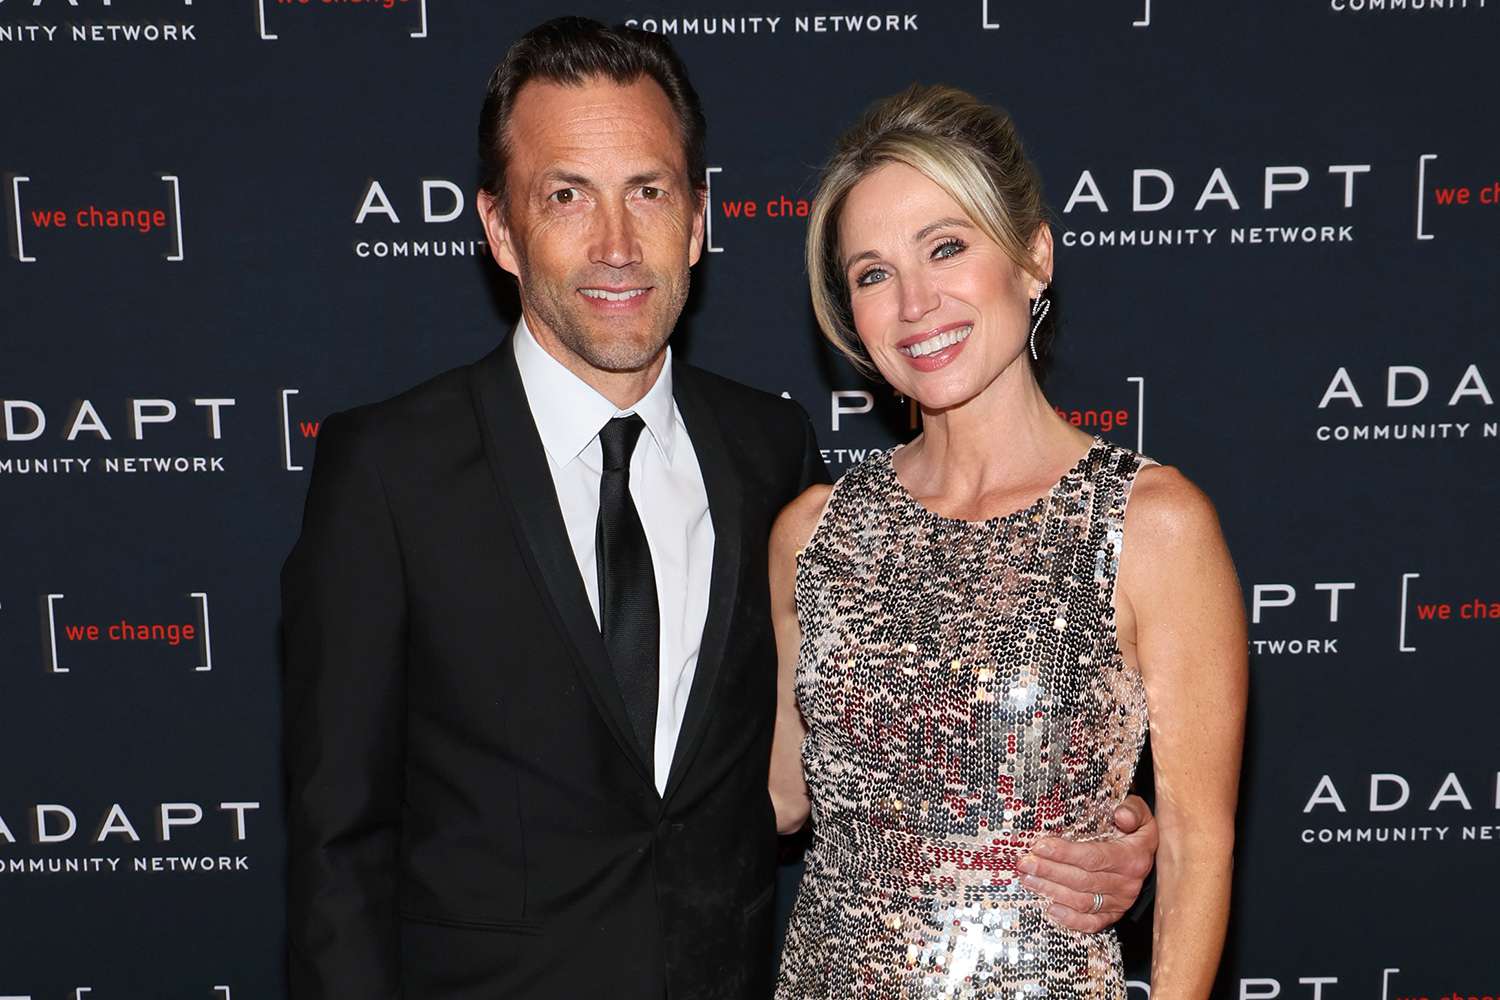 Andrew Shue and Amy Robach